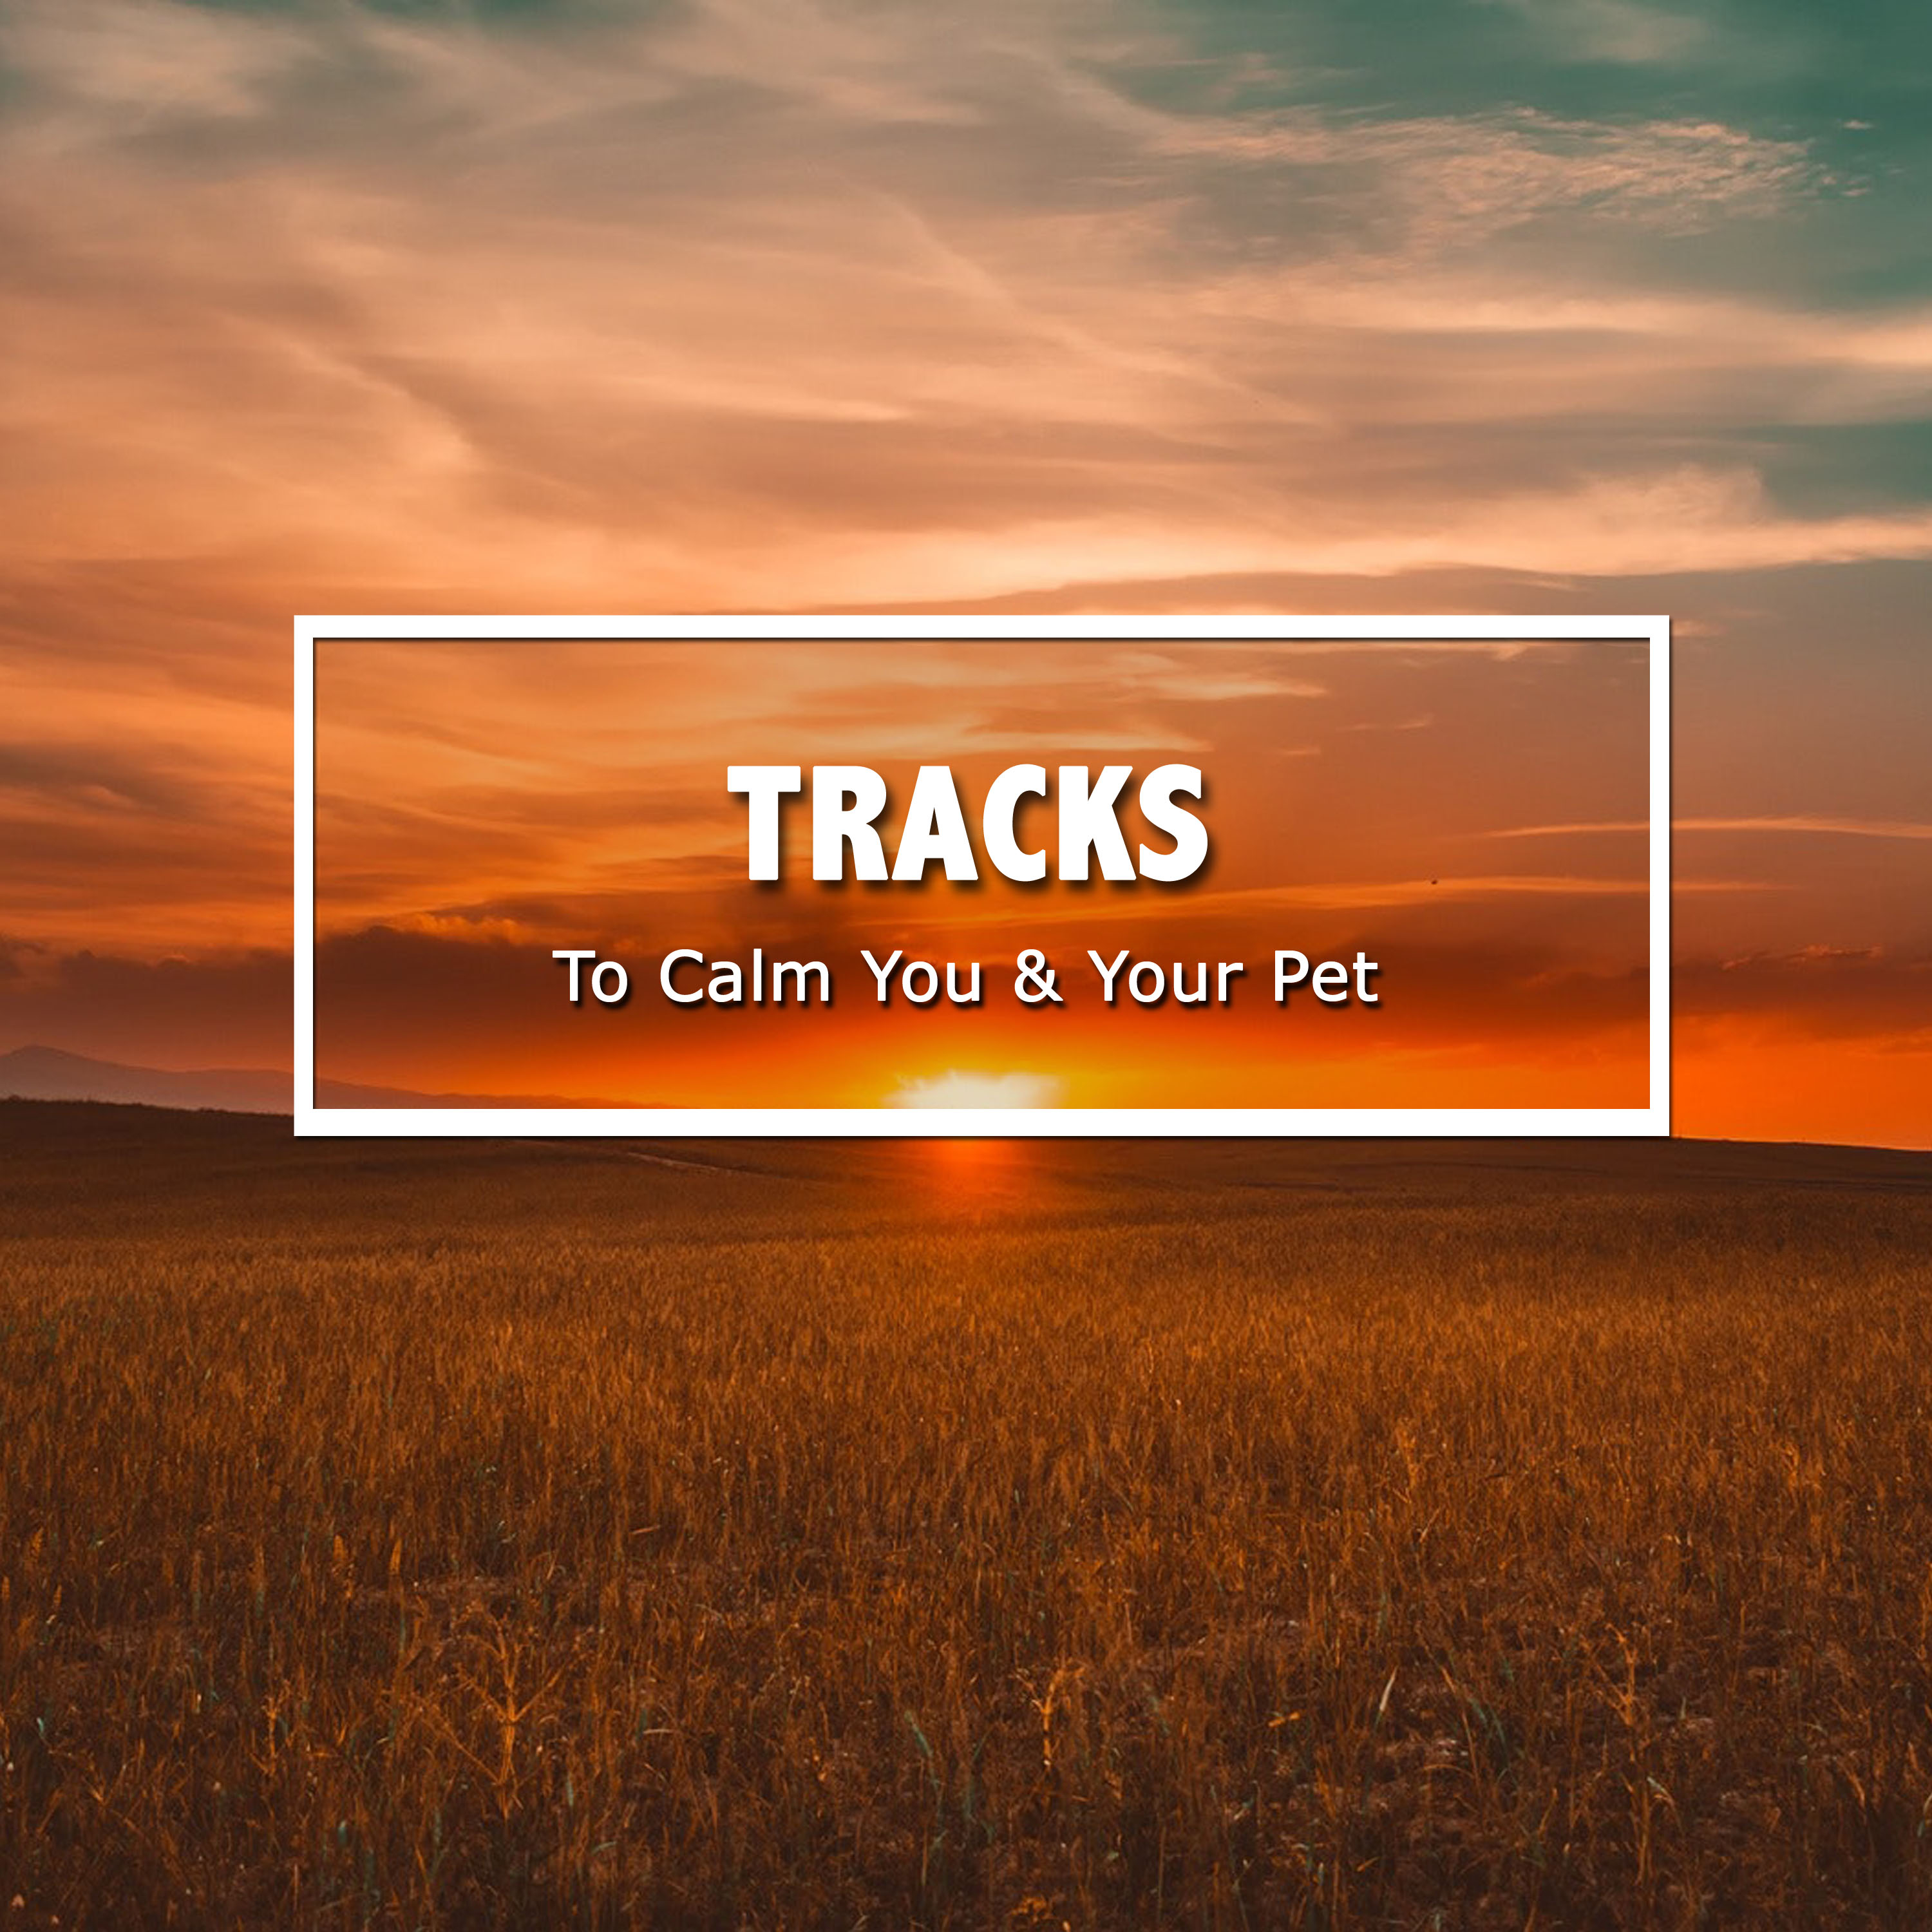 13 Tracks to Calm you and Your Pet